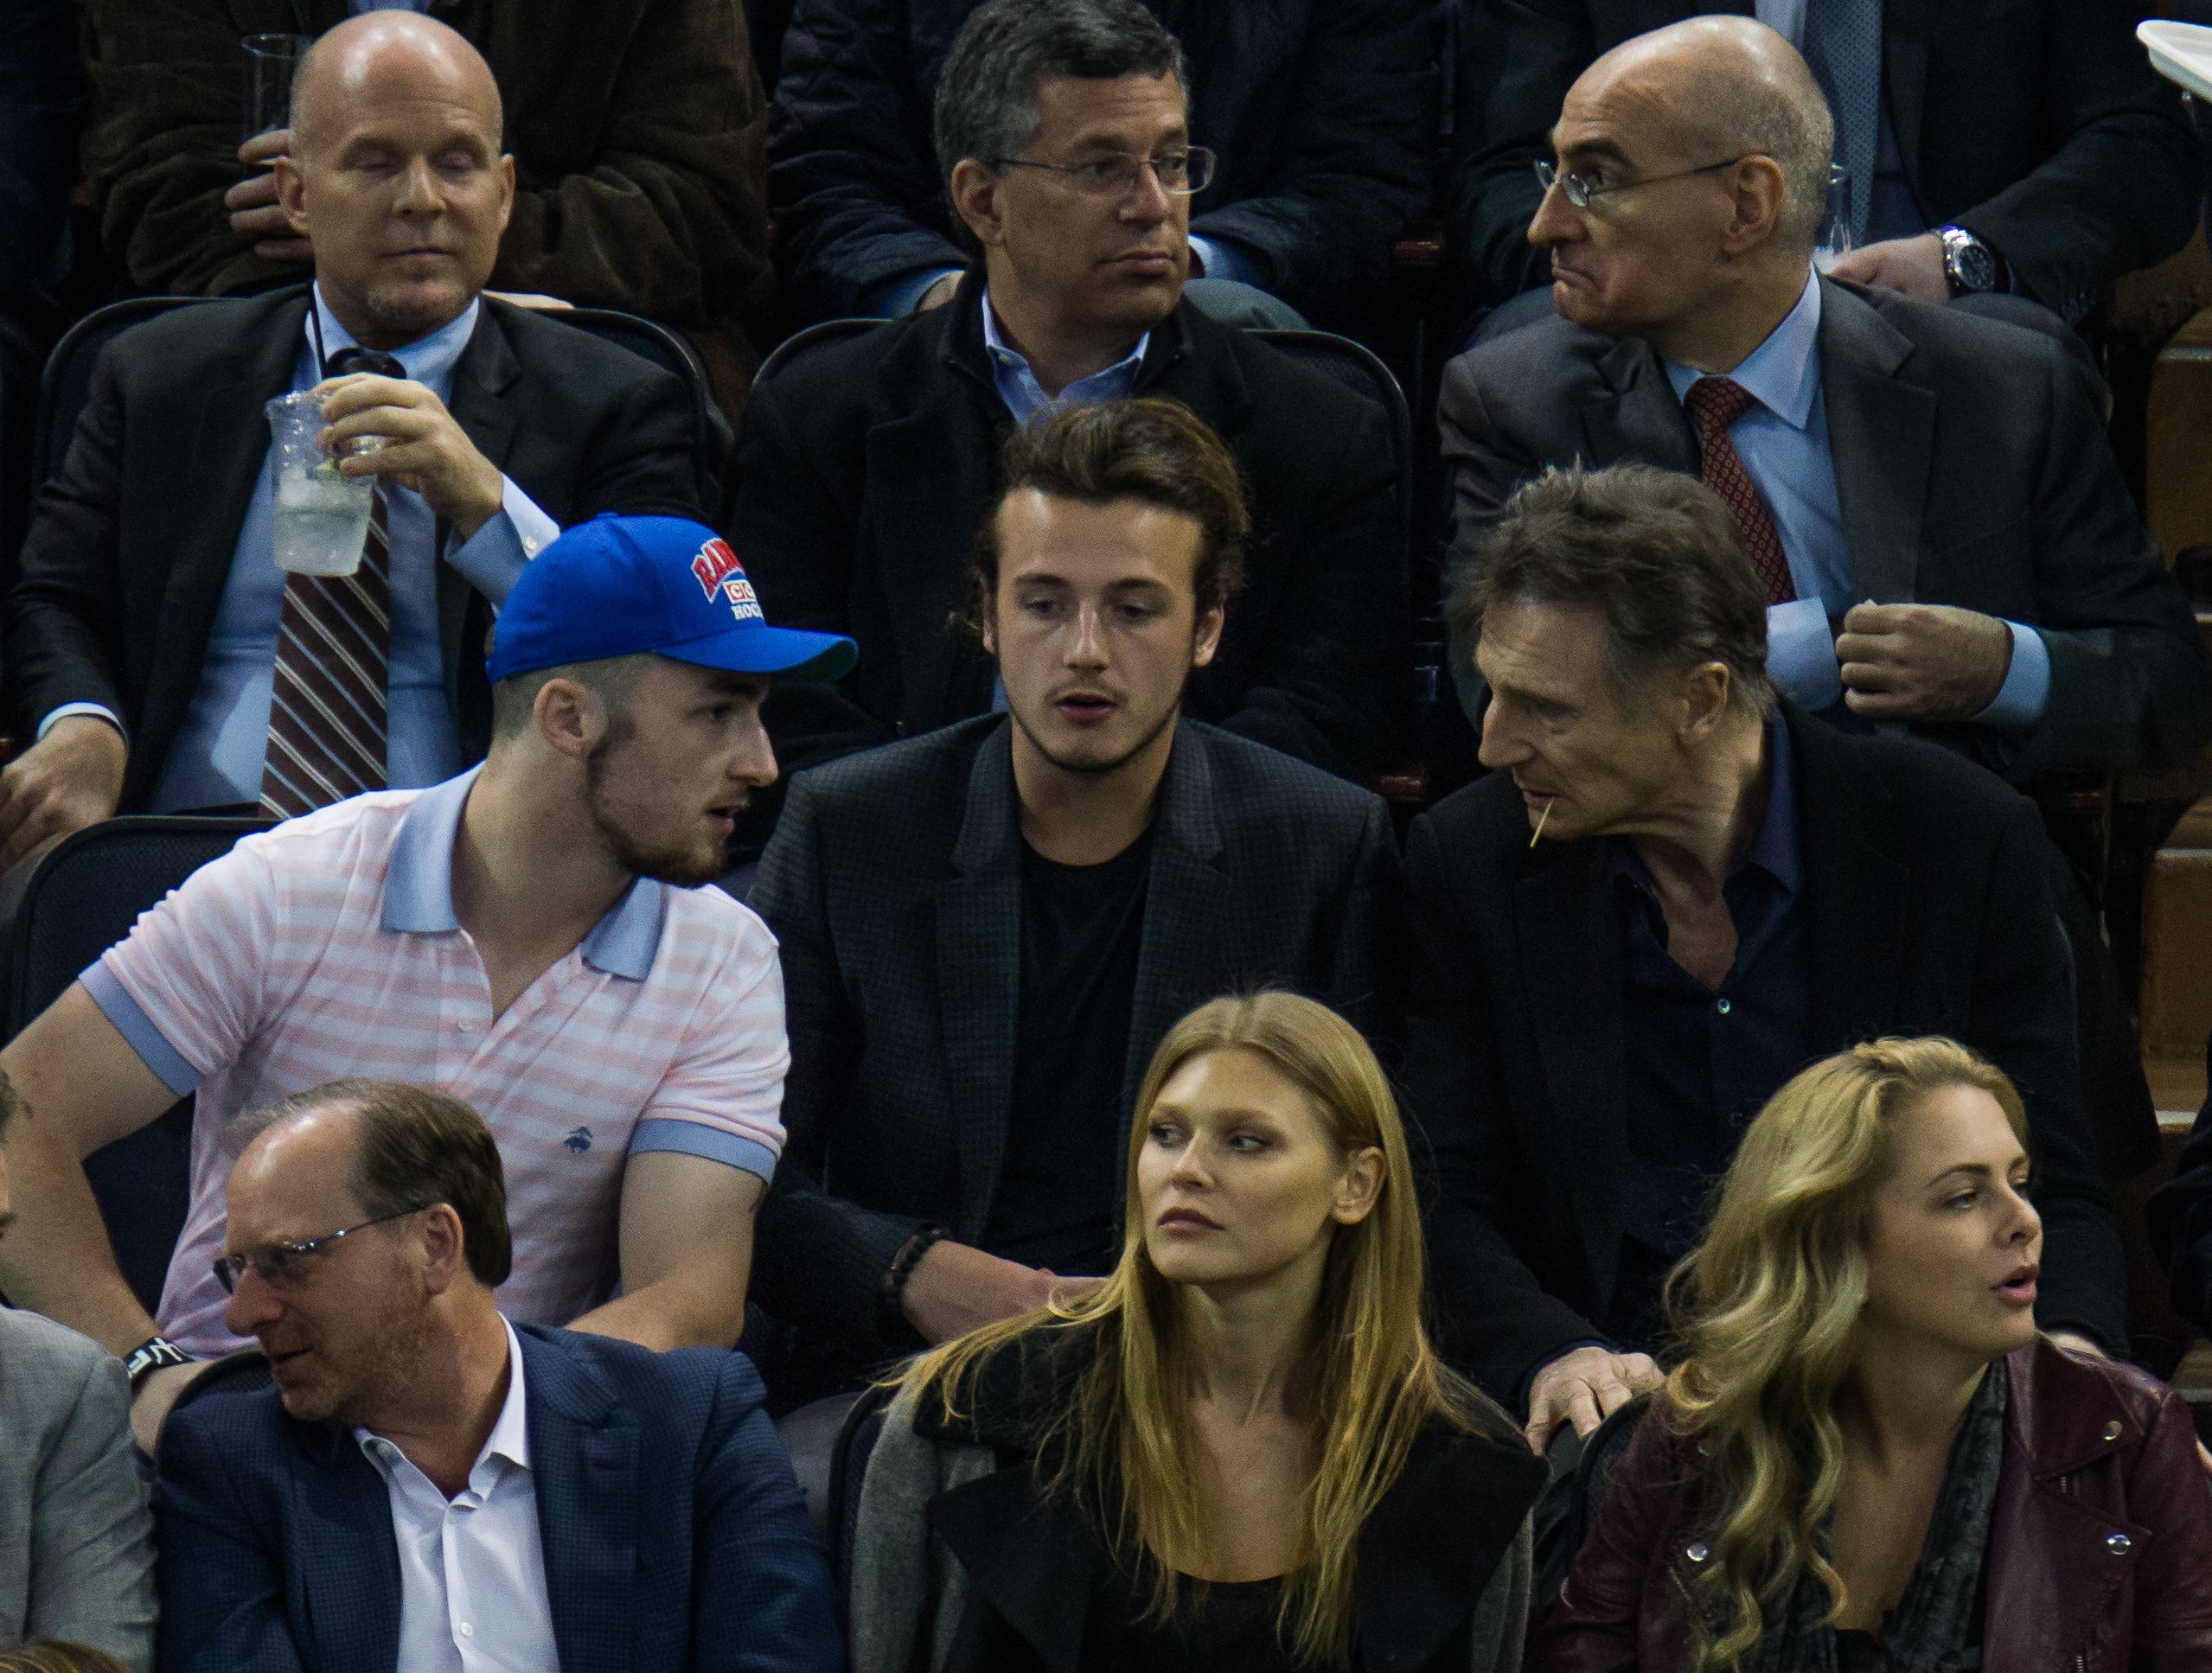 Liam Neeson and his sons, Daniel Neeson and Micheál Richardson at the New York Rangers Vs. Boston Bruins game on March 23, 2016 | Source: Getty Images